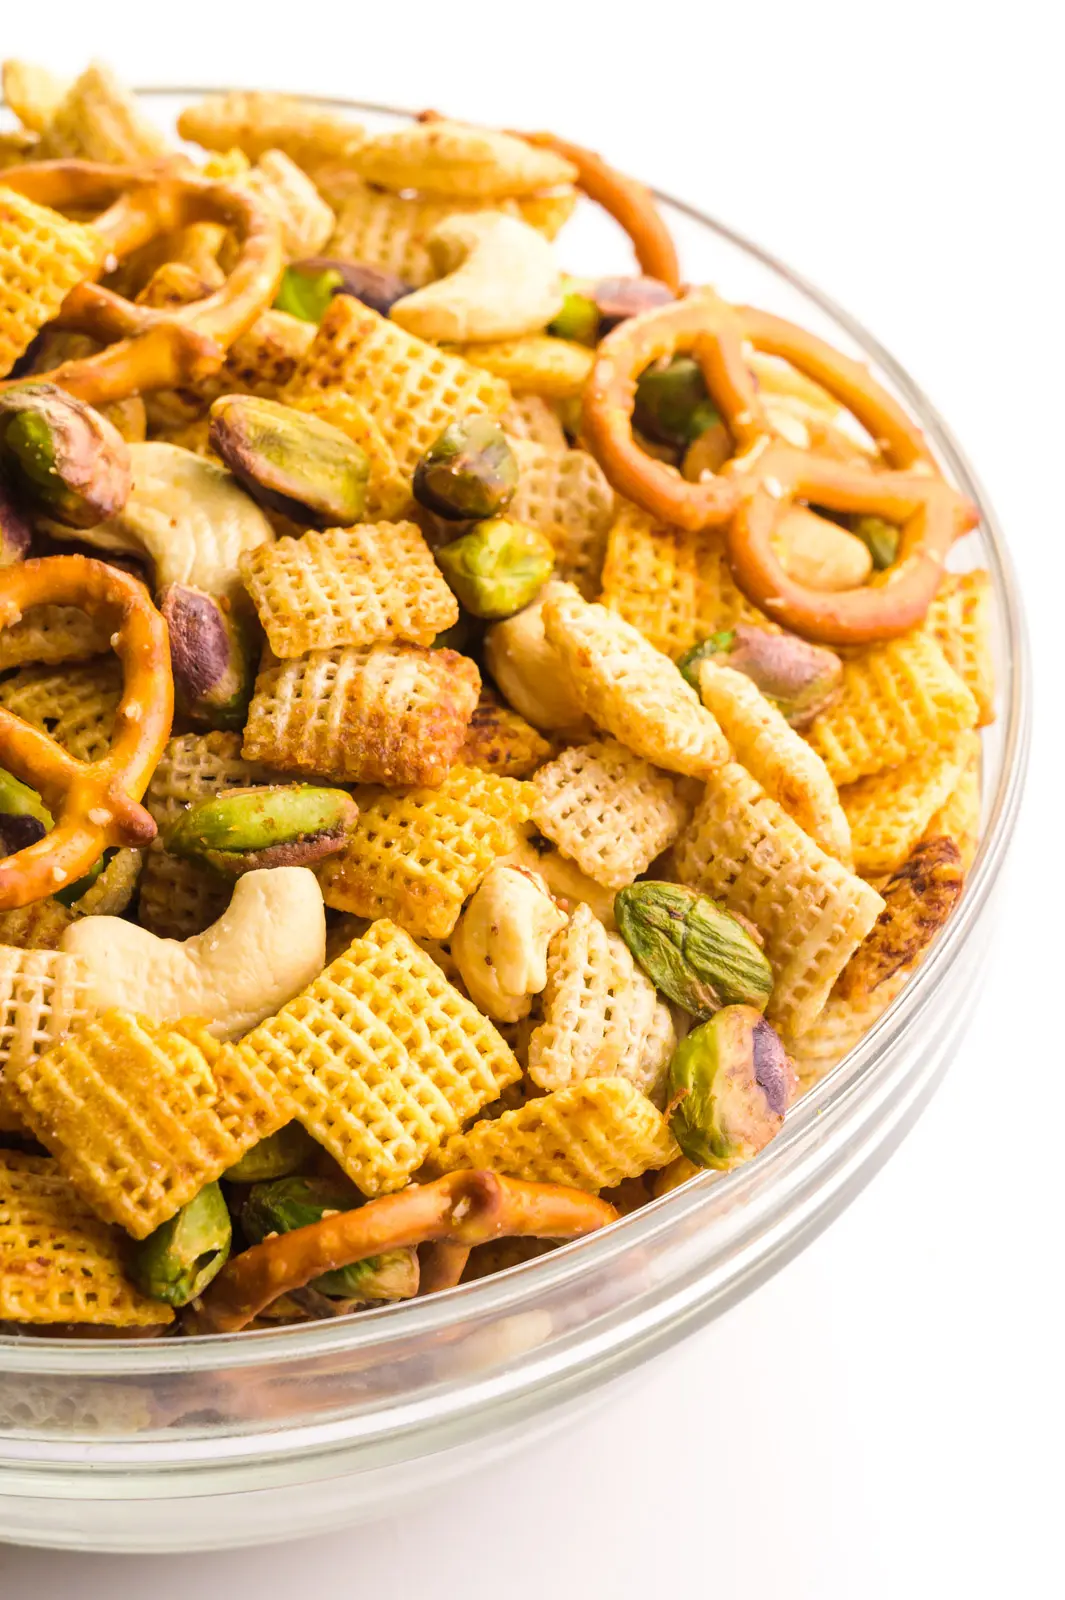 Gluten-free Chex mix is in a large serving bowl.